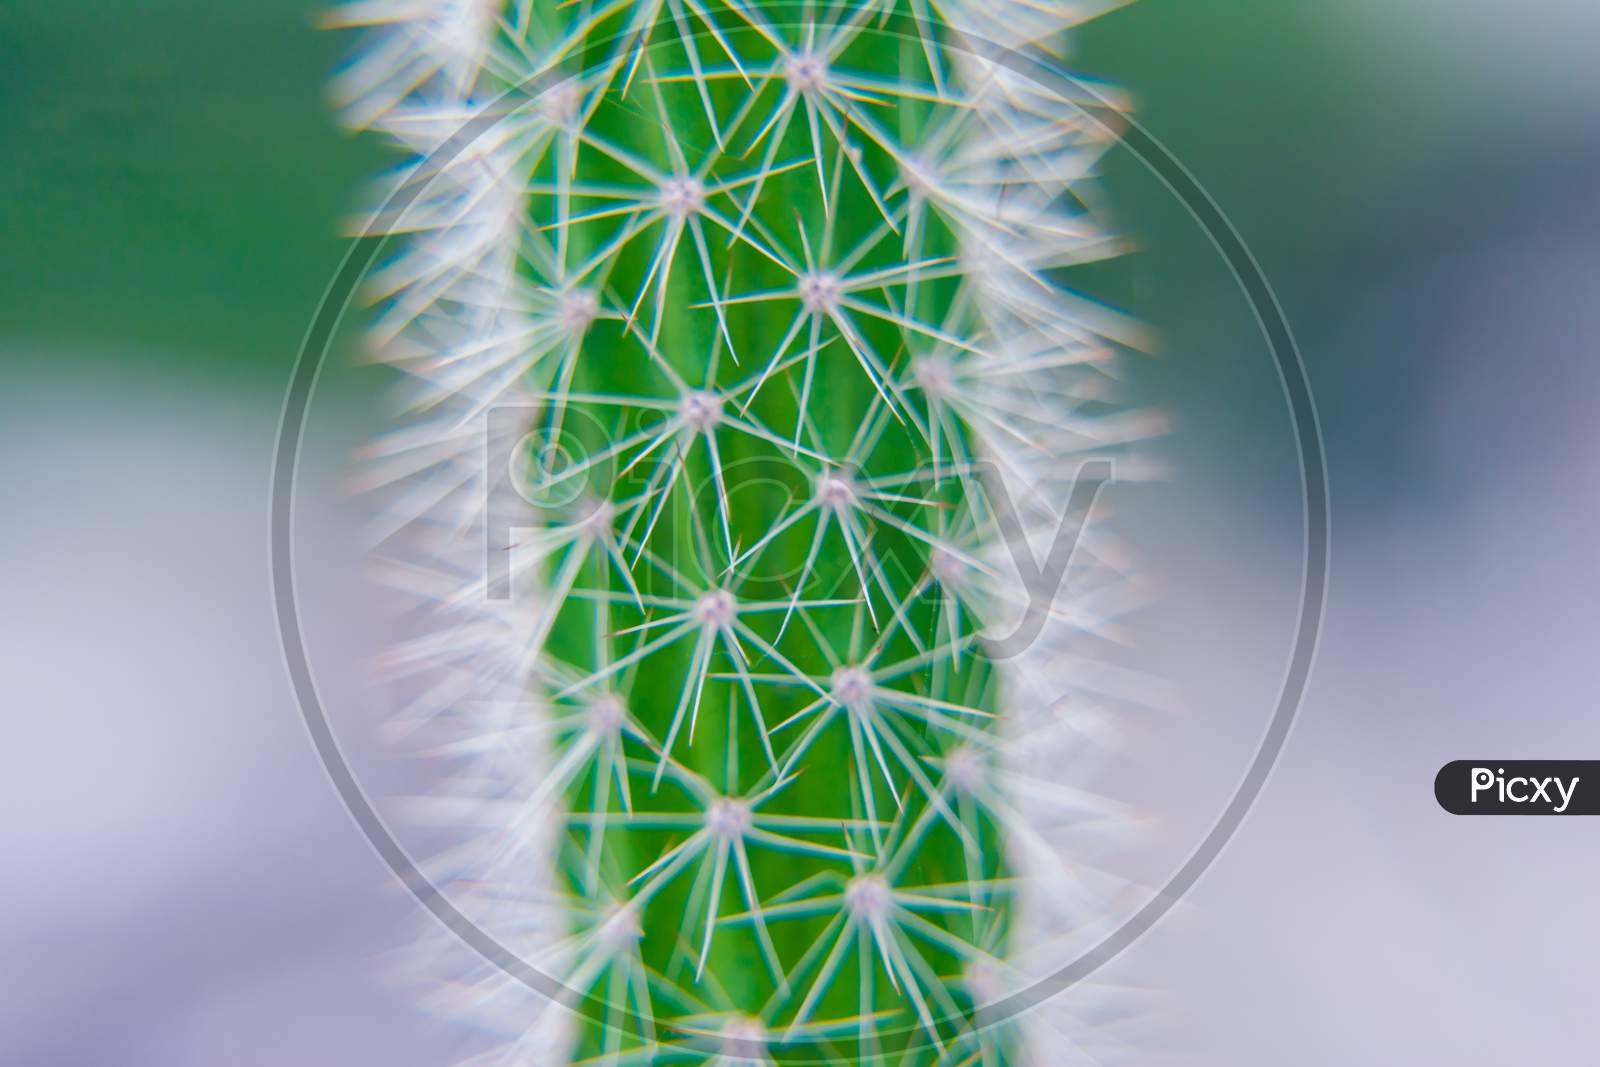 Macro closeup to the spines of a cactus with selective focus. Cactus with long red pointed spines with selective focus. copy space.